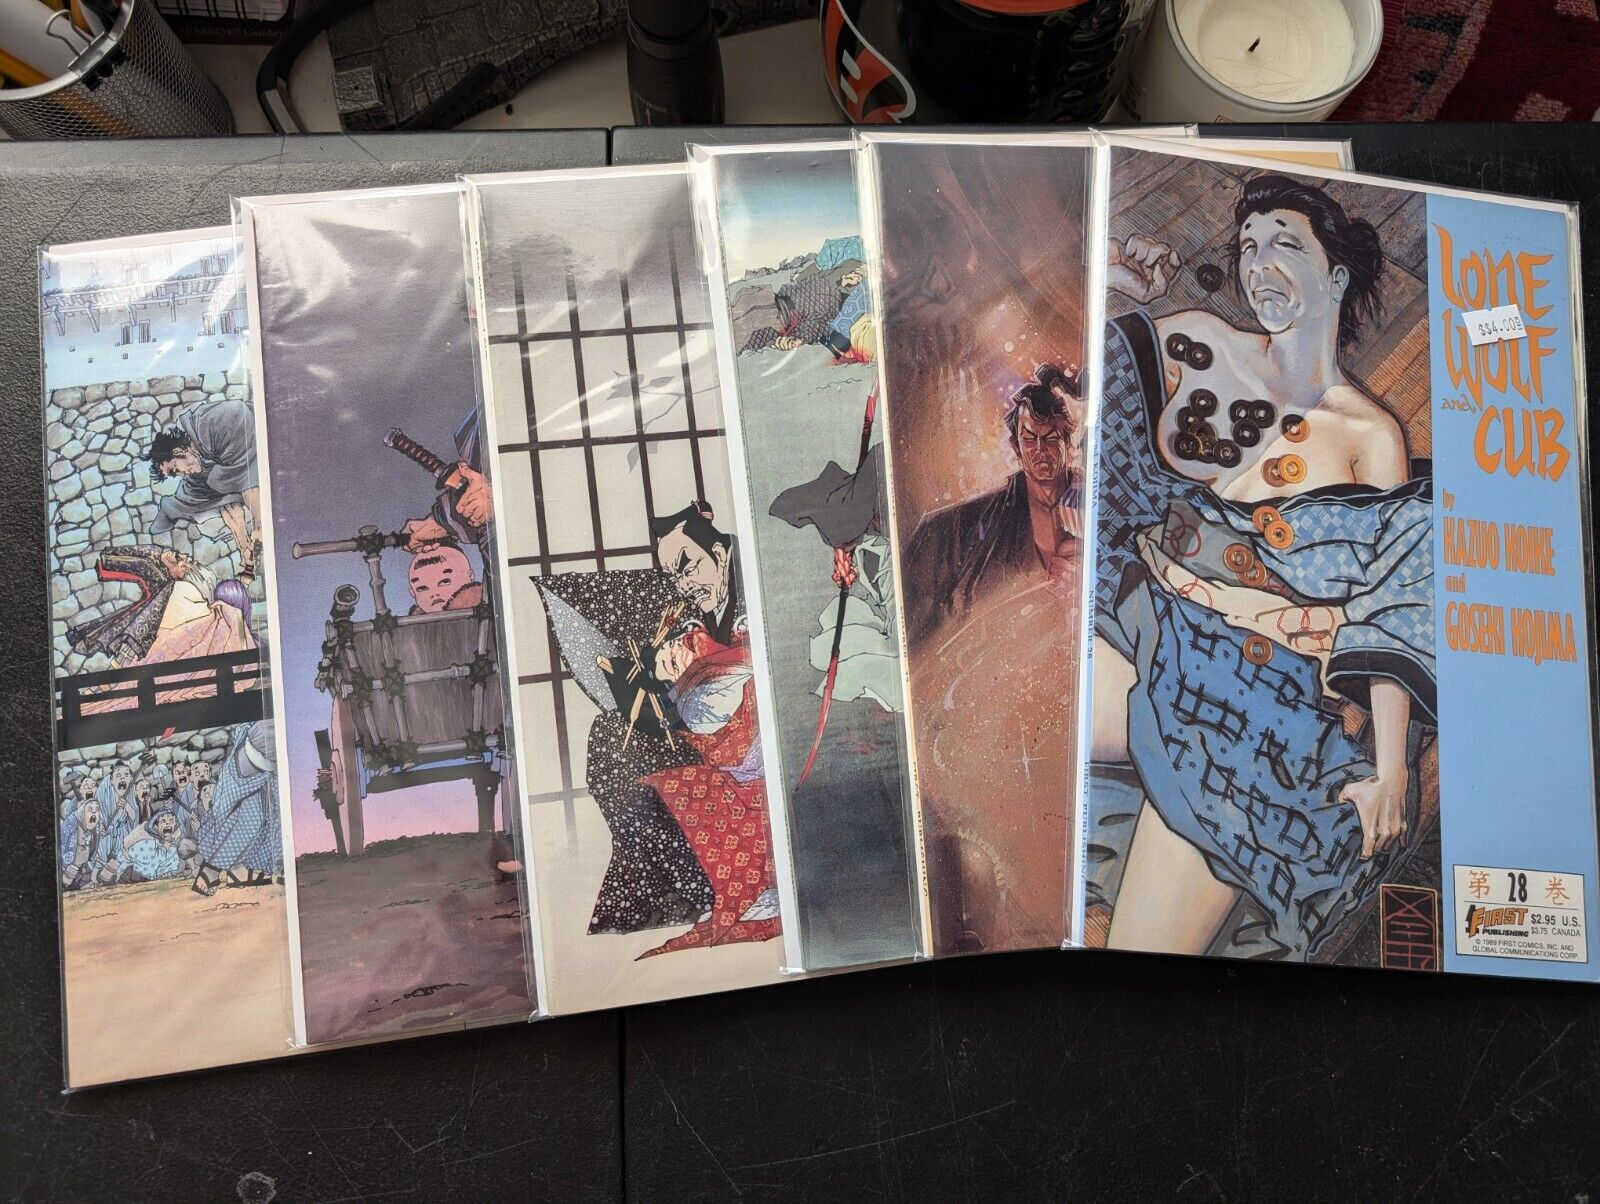 LONE WOLF AND CUB LOT #3, #5, #6, #7, #13, #28 FIRST COMICS HIGH GRADE